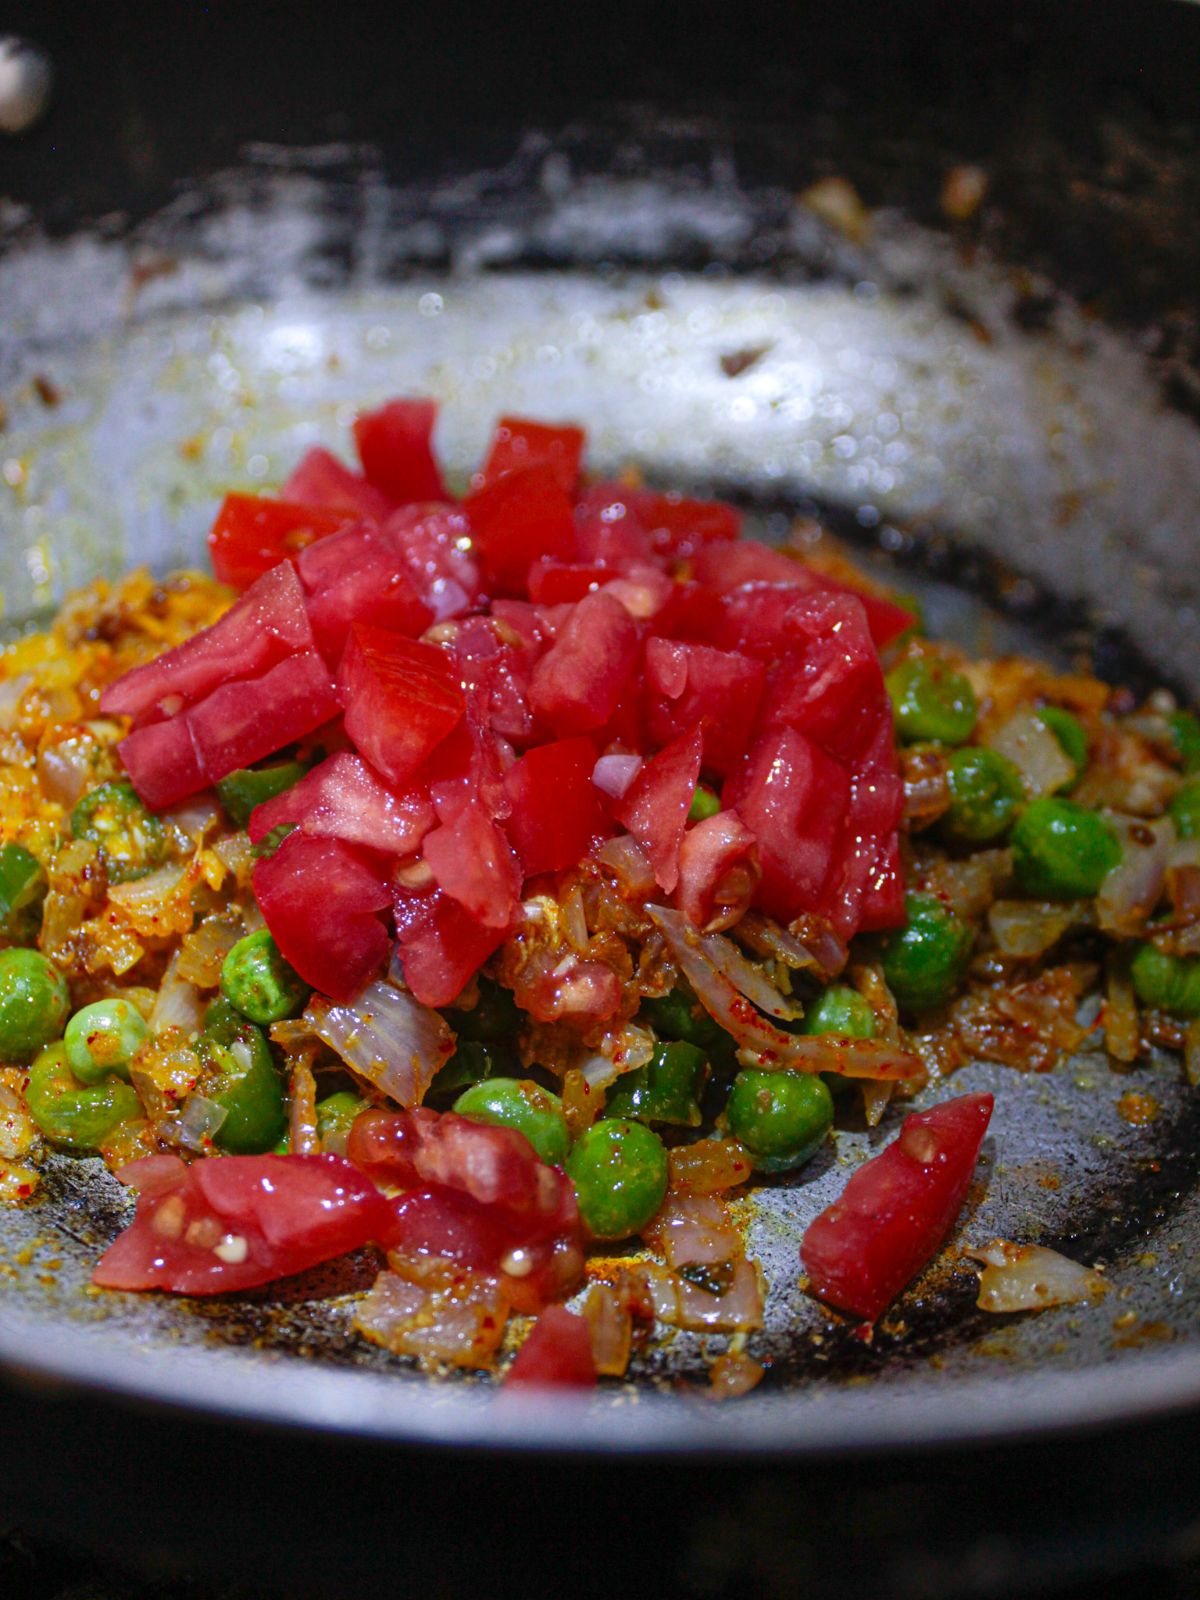 Chopped tomatoes on top of peas and onion in skillet